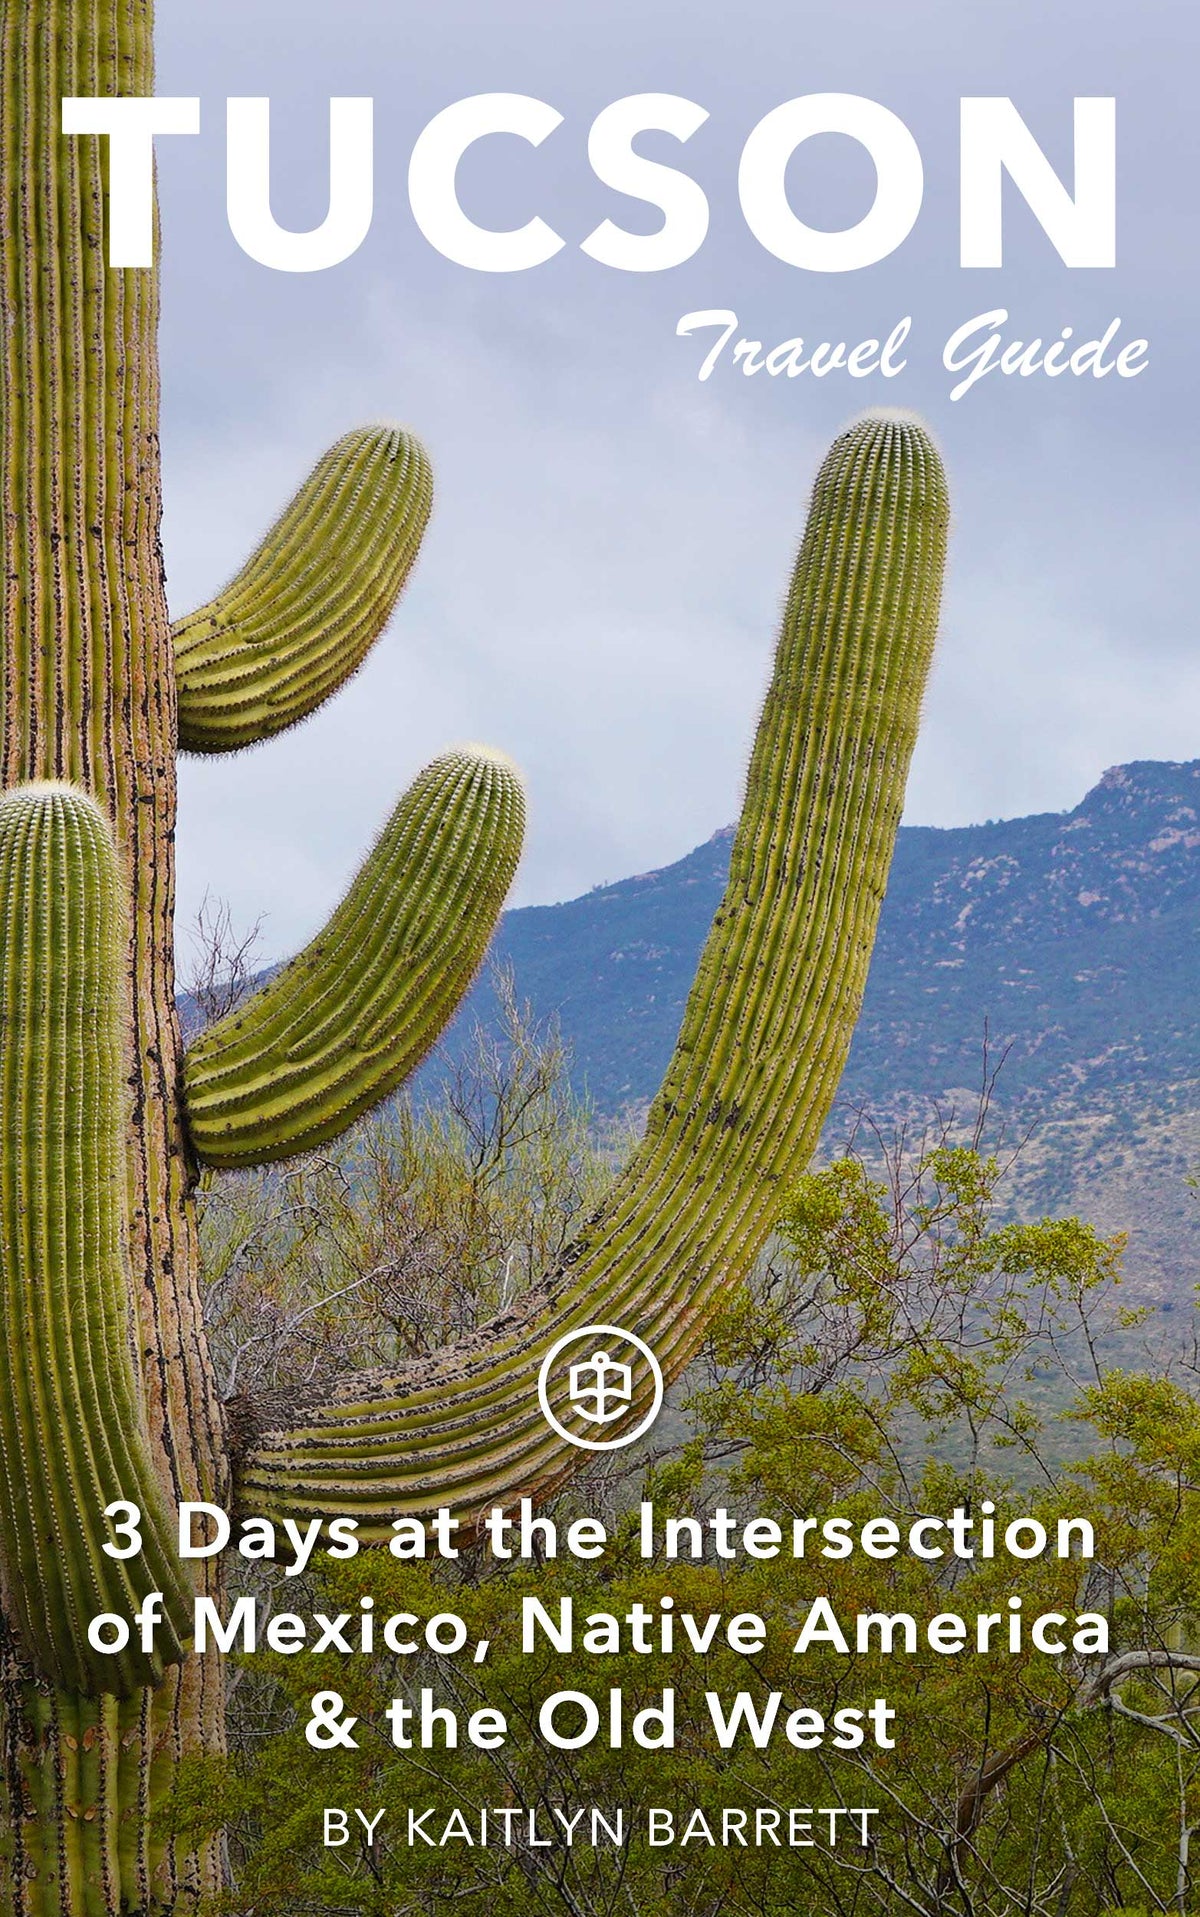 Tucson: 3 Days at the Intersection of Mexico, Native America & the Old West